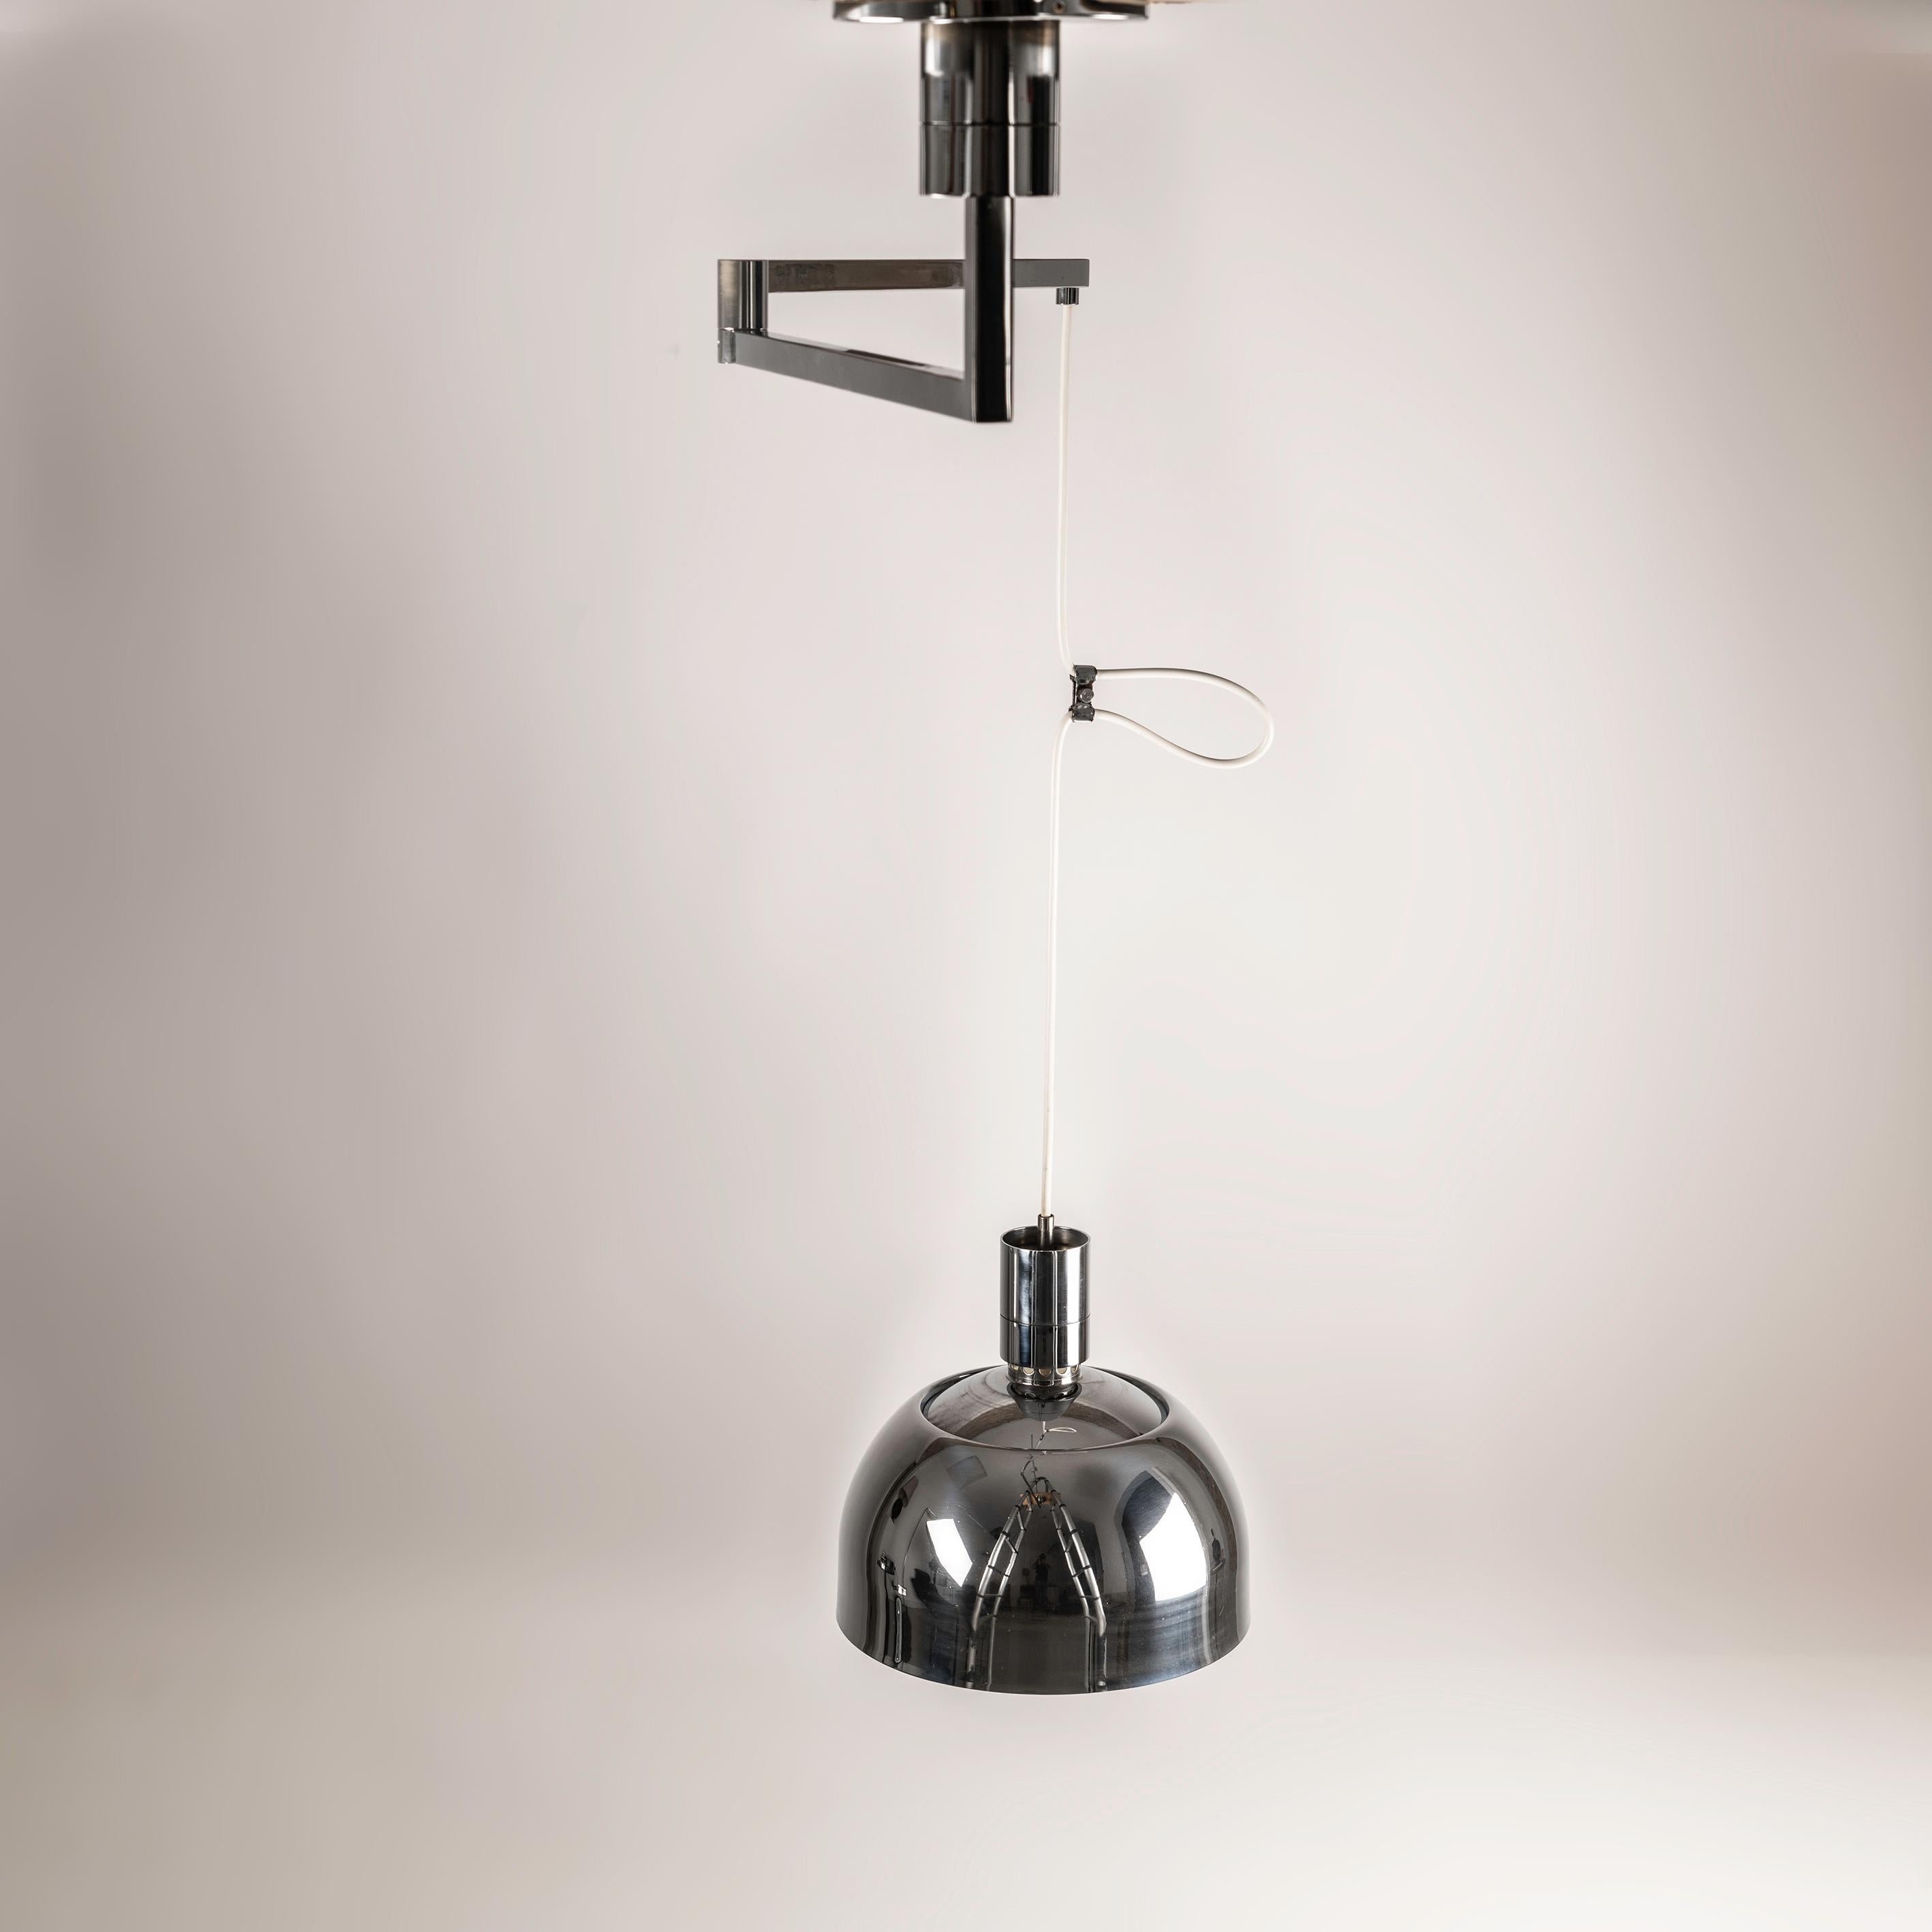 AM/AS Ceiling Lamp with Chromed Swing Arm by Franco Albini for Sirrah, 1960s For Sale 2